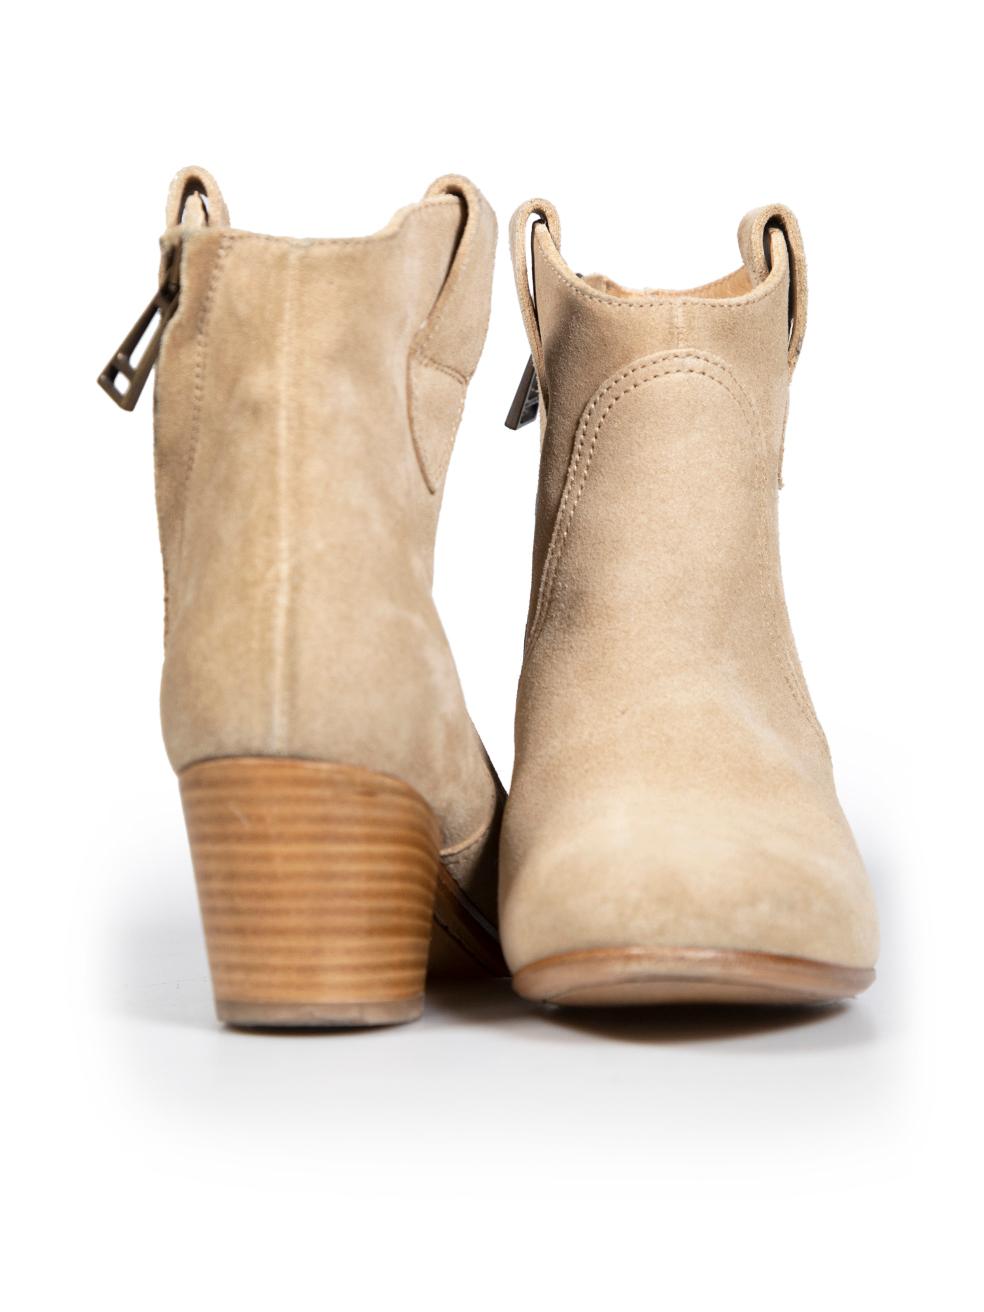 Belstaff Beige Suede Ankle Boots Size IT 35 In Good Condition For Sale In London, GB